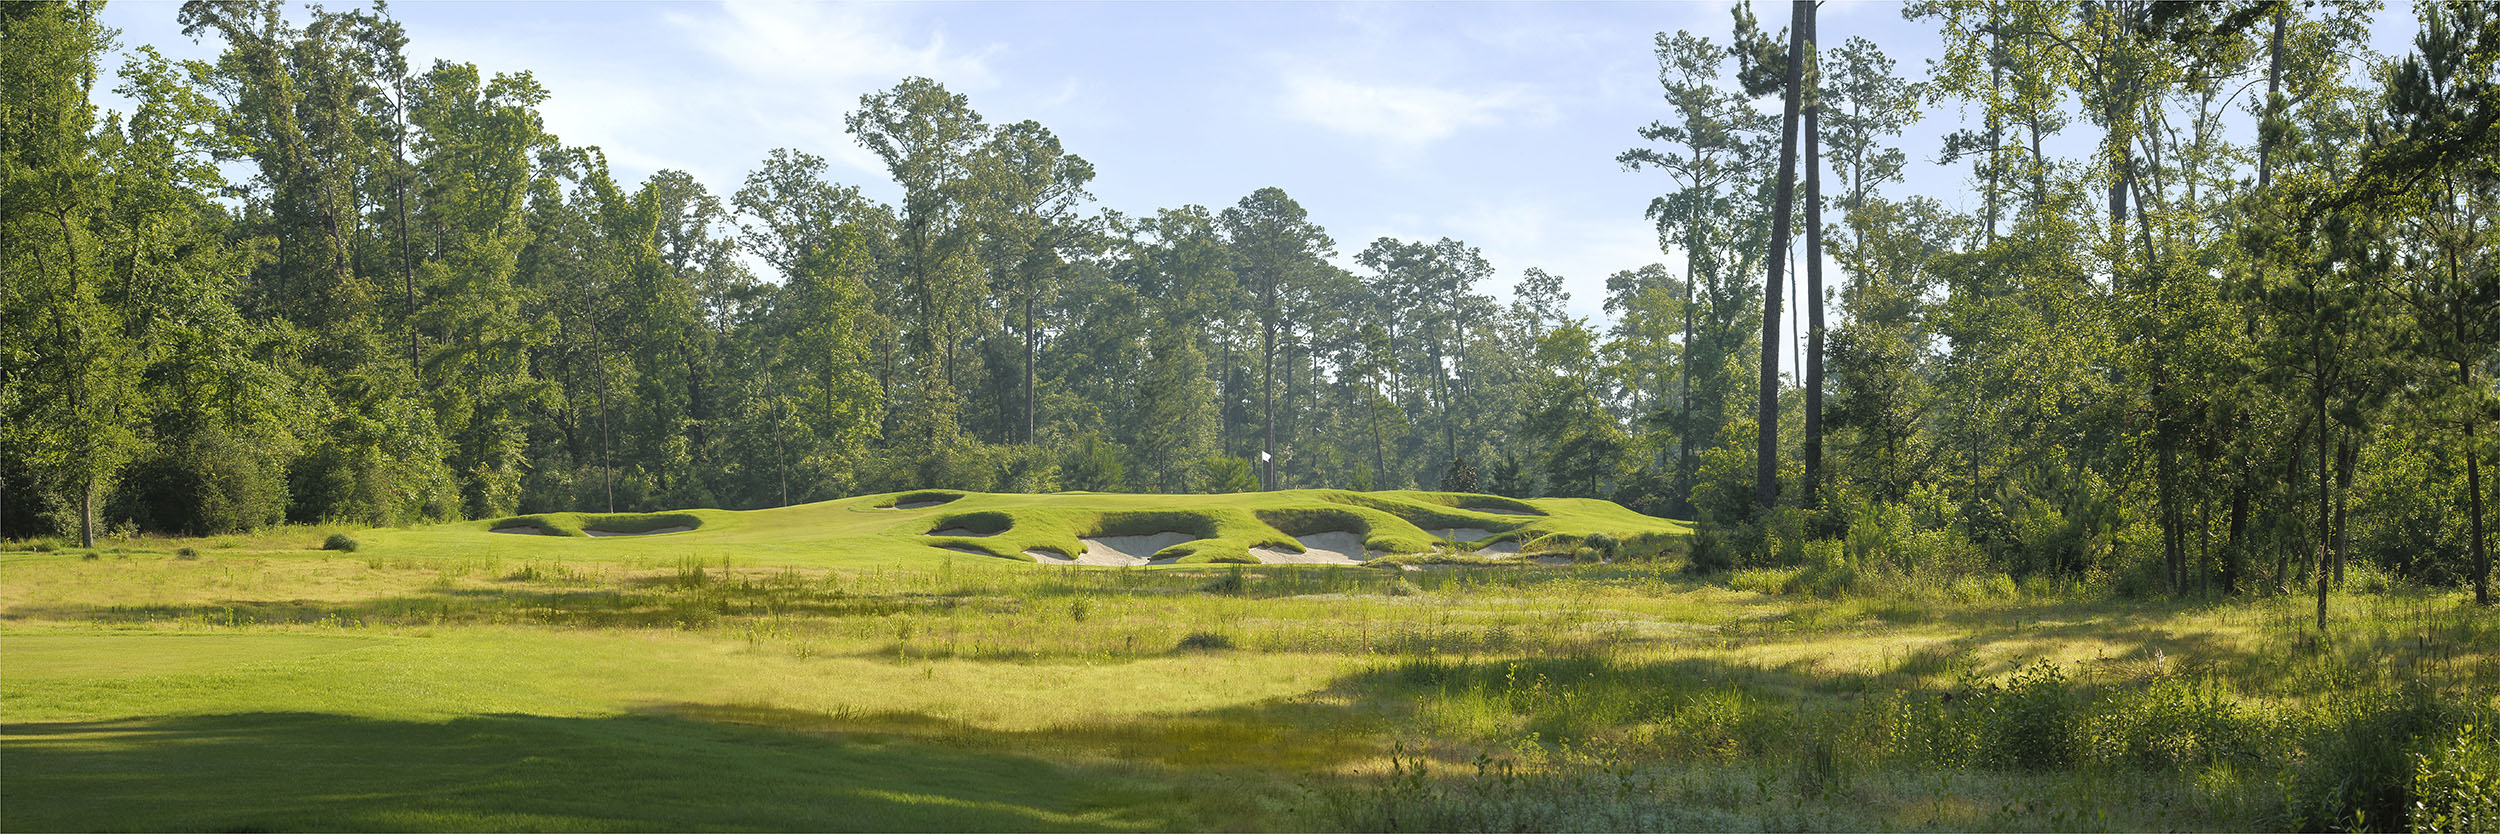 Whispering Pines Needler Course No 5